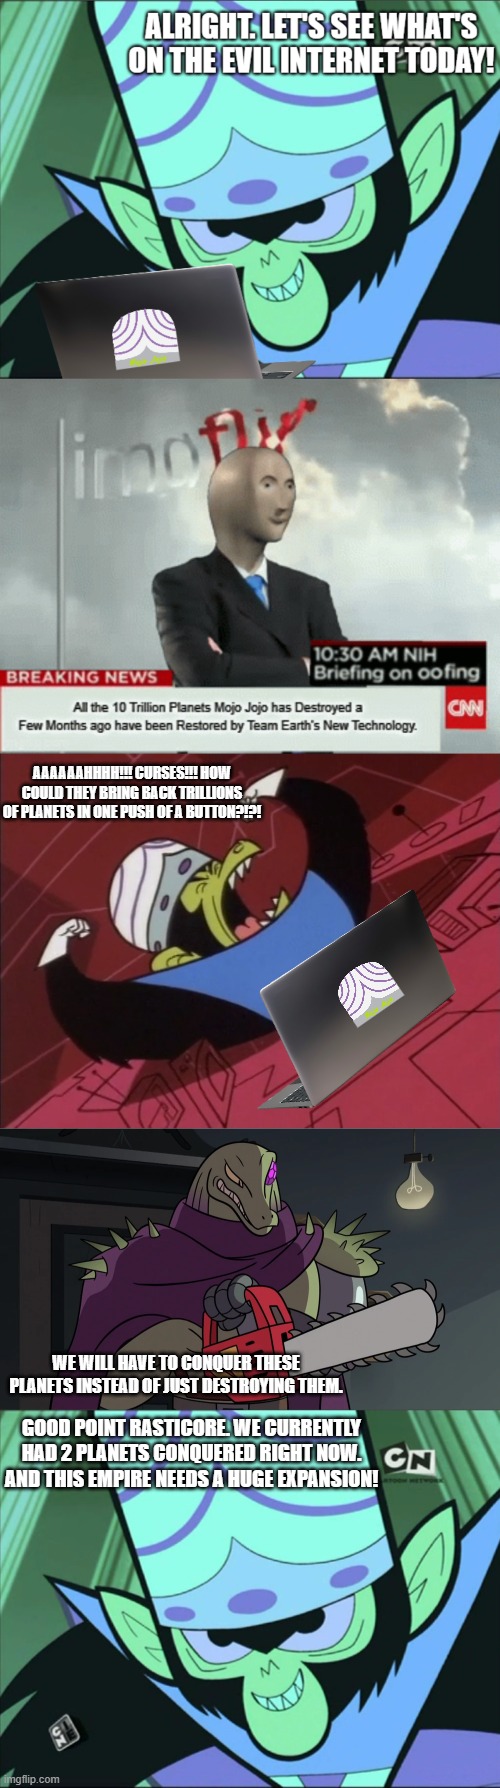 AAAAAAHHHH!!! CURSES!!! HOW COULD THEY BRING BACK TRILLIONS OF PLANETS IN ONE PUSH OF A BUTTON?!?! WE WILL HAVE TO CONQUER THESE PLANETS INSTEAD OF JUST DESTROYING THEM. GOOD POINT RASTICORE. WE CURRENTLY HAD 2 PLANETS CONQUERED RIGHT NOW. AND THIS EMPIRE NEEDS A HUGE EXPANSION! | image tagged in mojo jojo | made w/ Imgflip meme maker